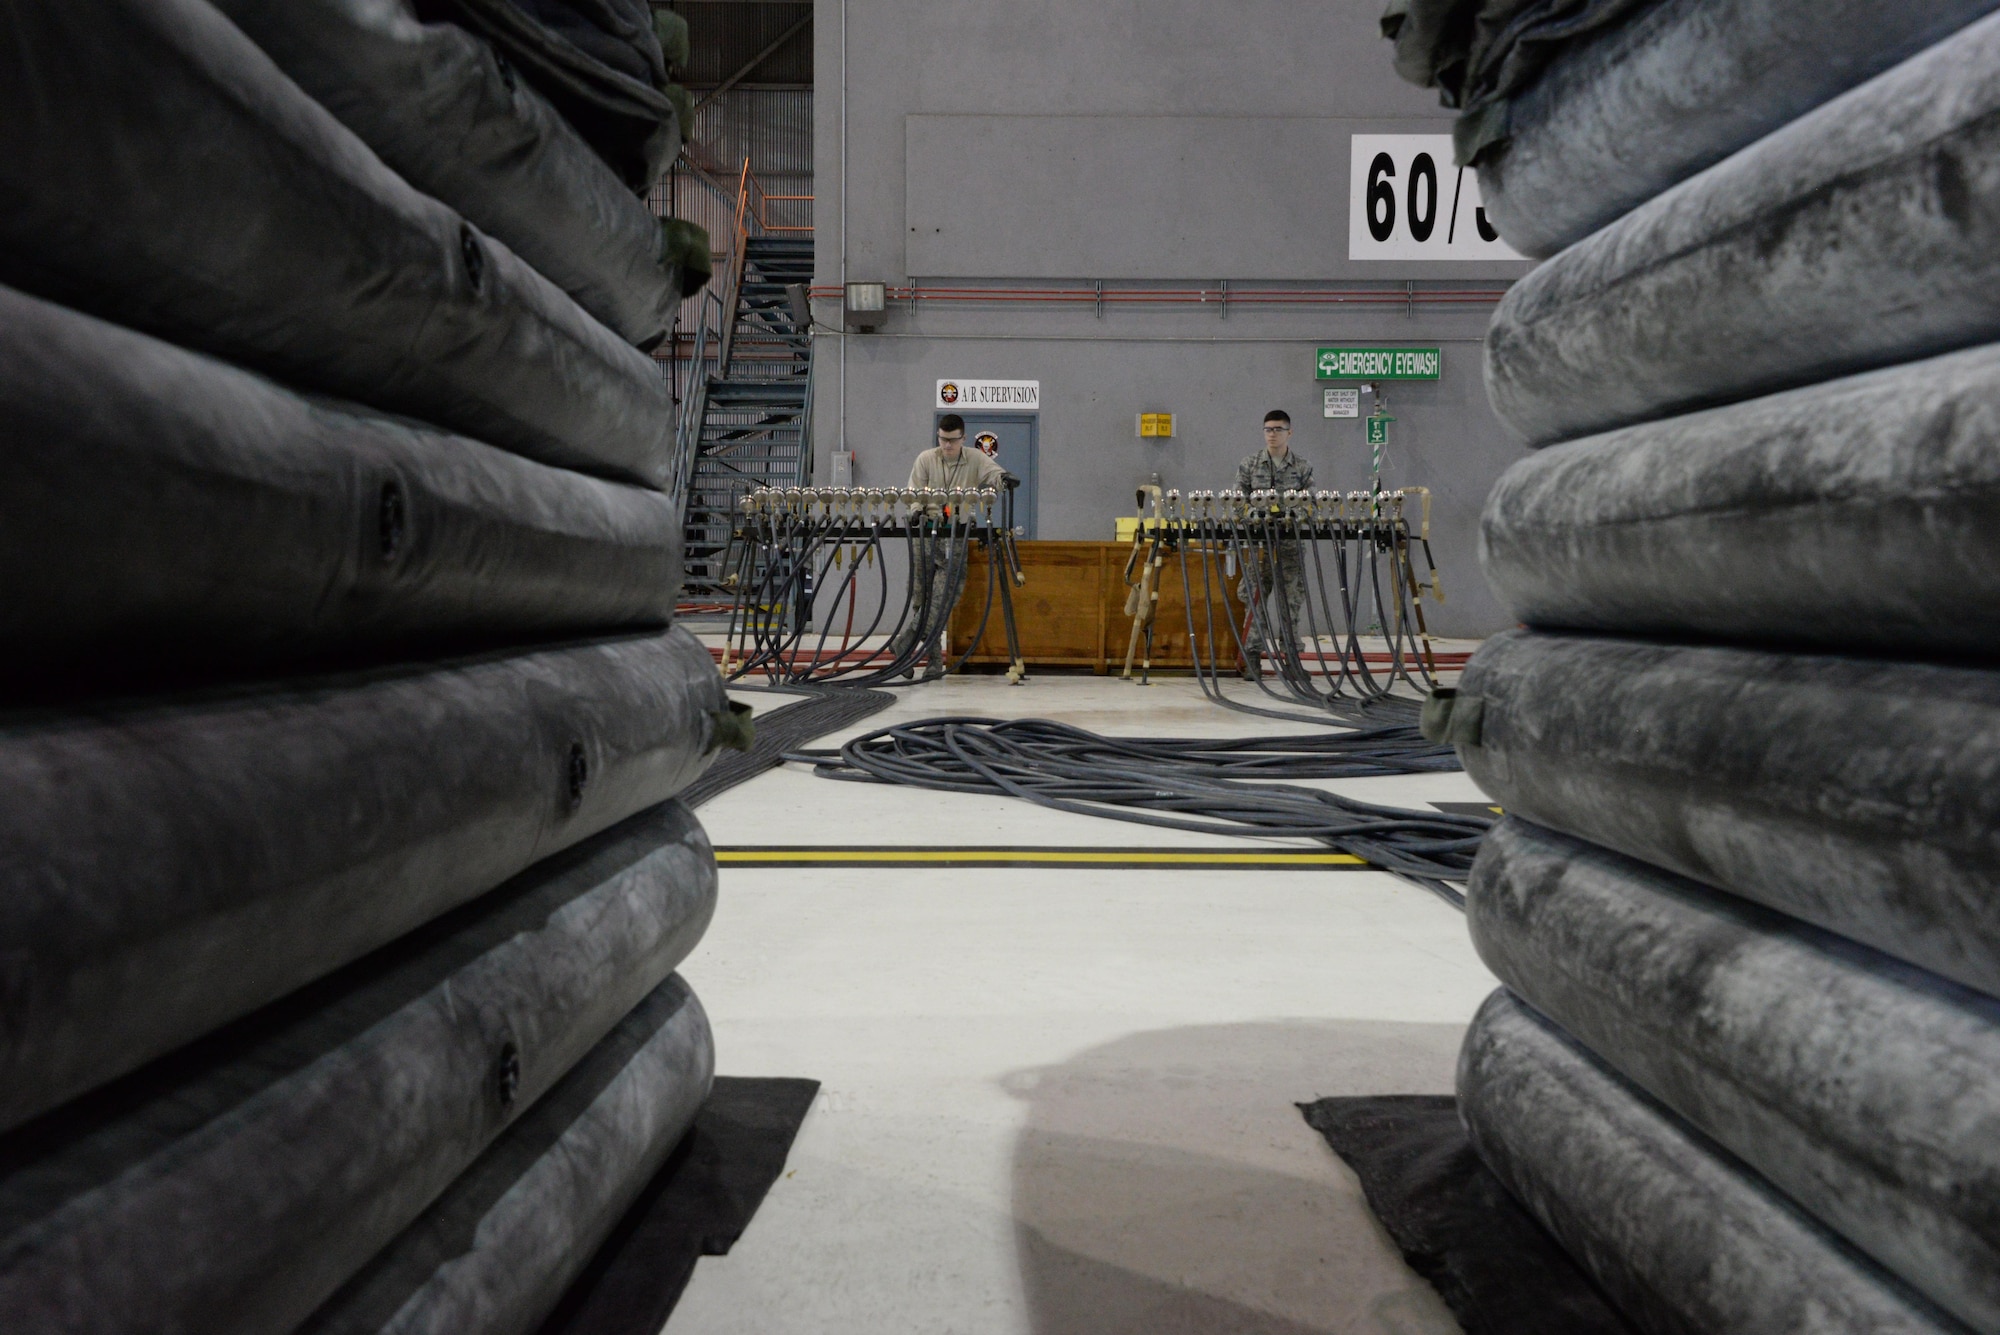 Airmen from the 60th Maintenance Squadron inspect large lifting bags for leaks during an annual quality assurance inspection of the crash, damaged or disabled aircraft recovery program Feb. 9, 2017 at Travis Air Force Base, Calif. The lifting bags, capable of supporting up to 52,000 pounds individually, are used to lift a downed aircraft so it can be salvaged, repaired and recovered.  (U.S. Air Force photo by Senior Airman Amber Carter)